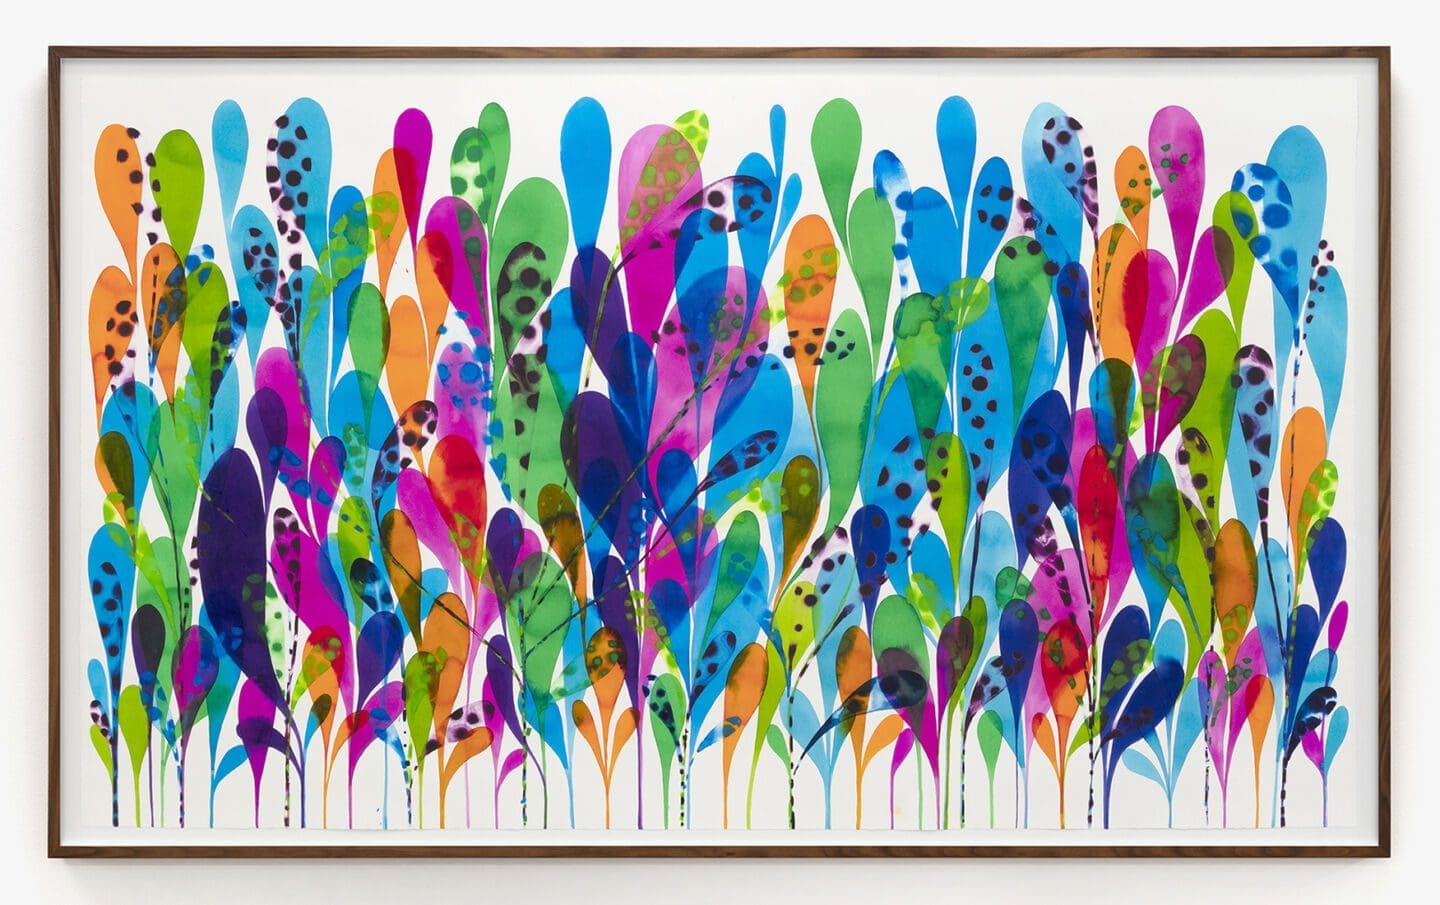 Masako Miki Offering, Haunted Field of Flowers, 2023 Ink and watercolor on paper 45 7/8 x 78 inches (116.5 x 198.1 cm)